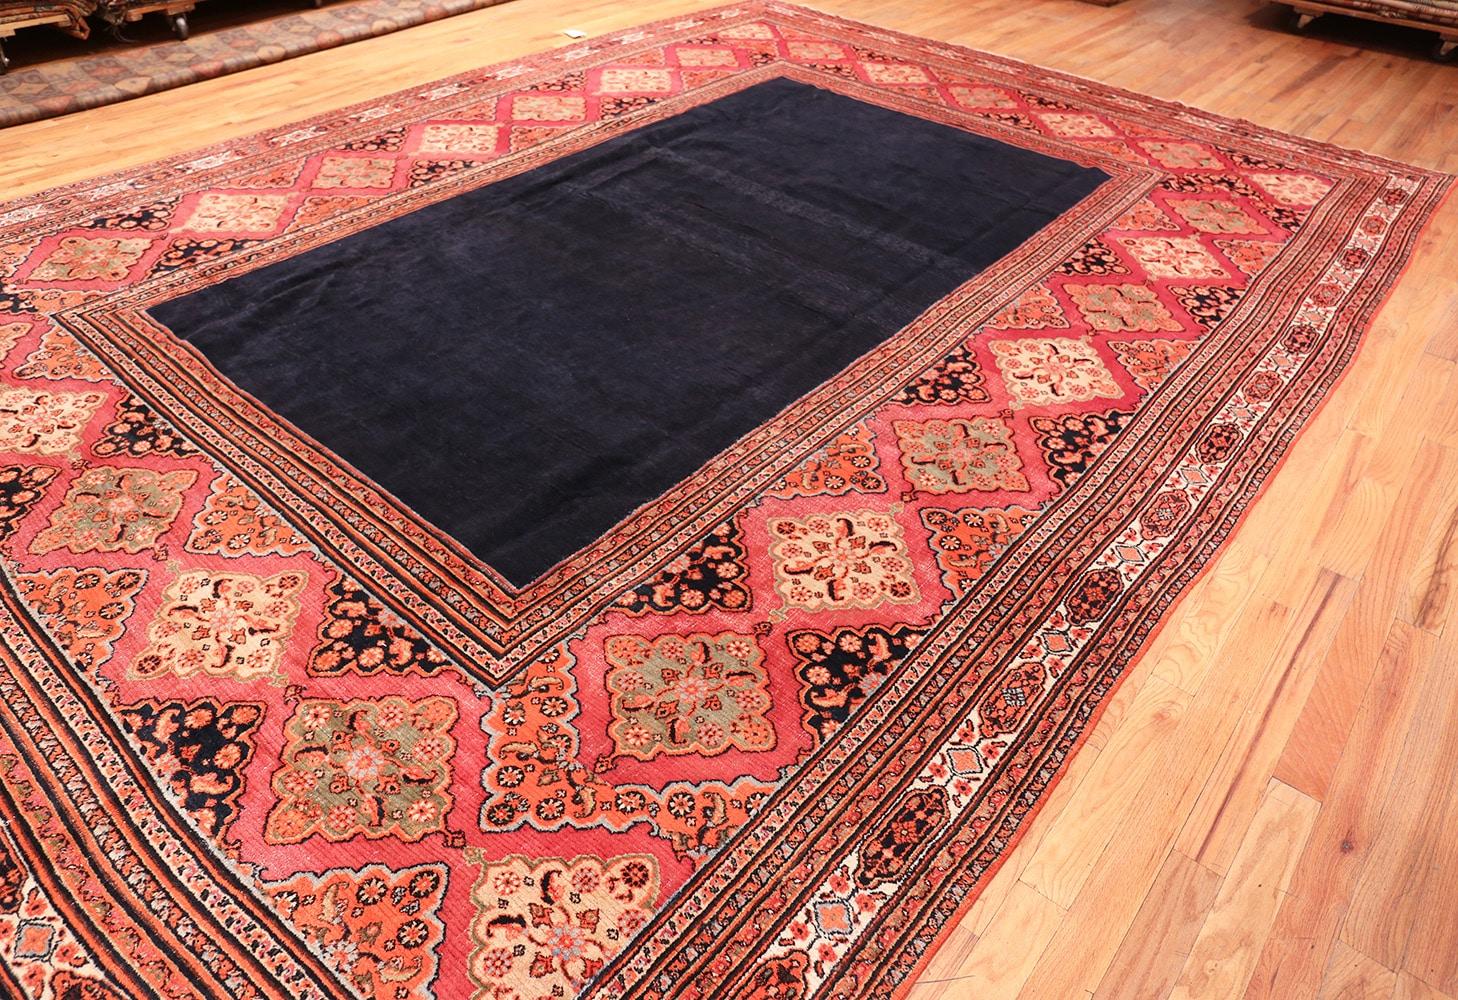 Hand-Knotted Antique Persian Khorassan Carpet. Size: 11' 9